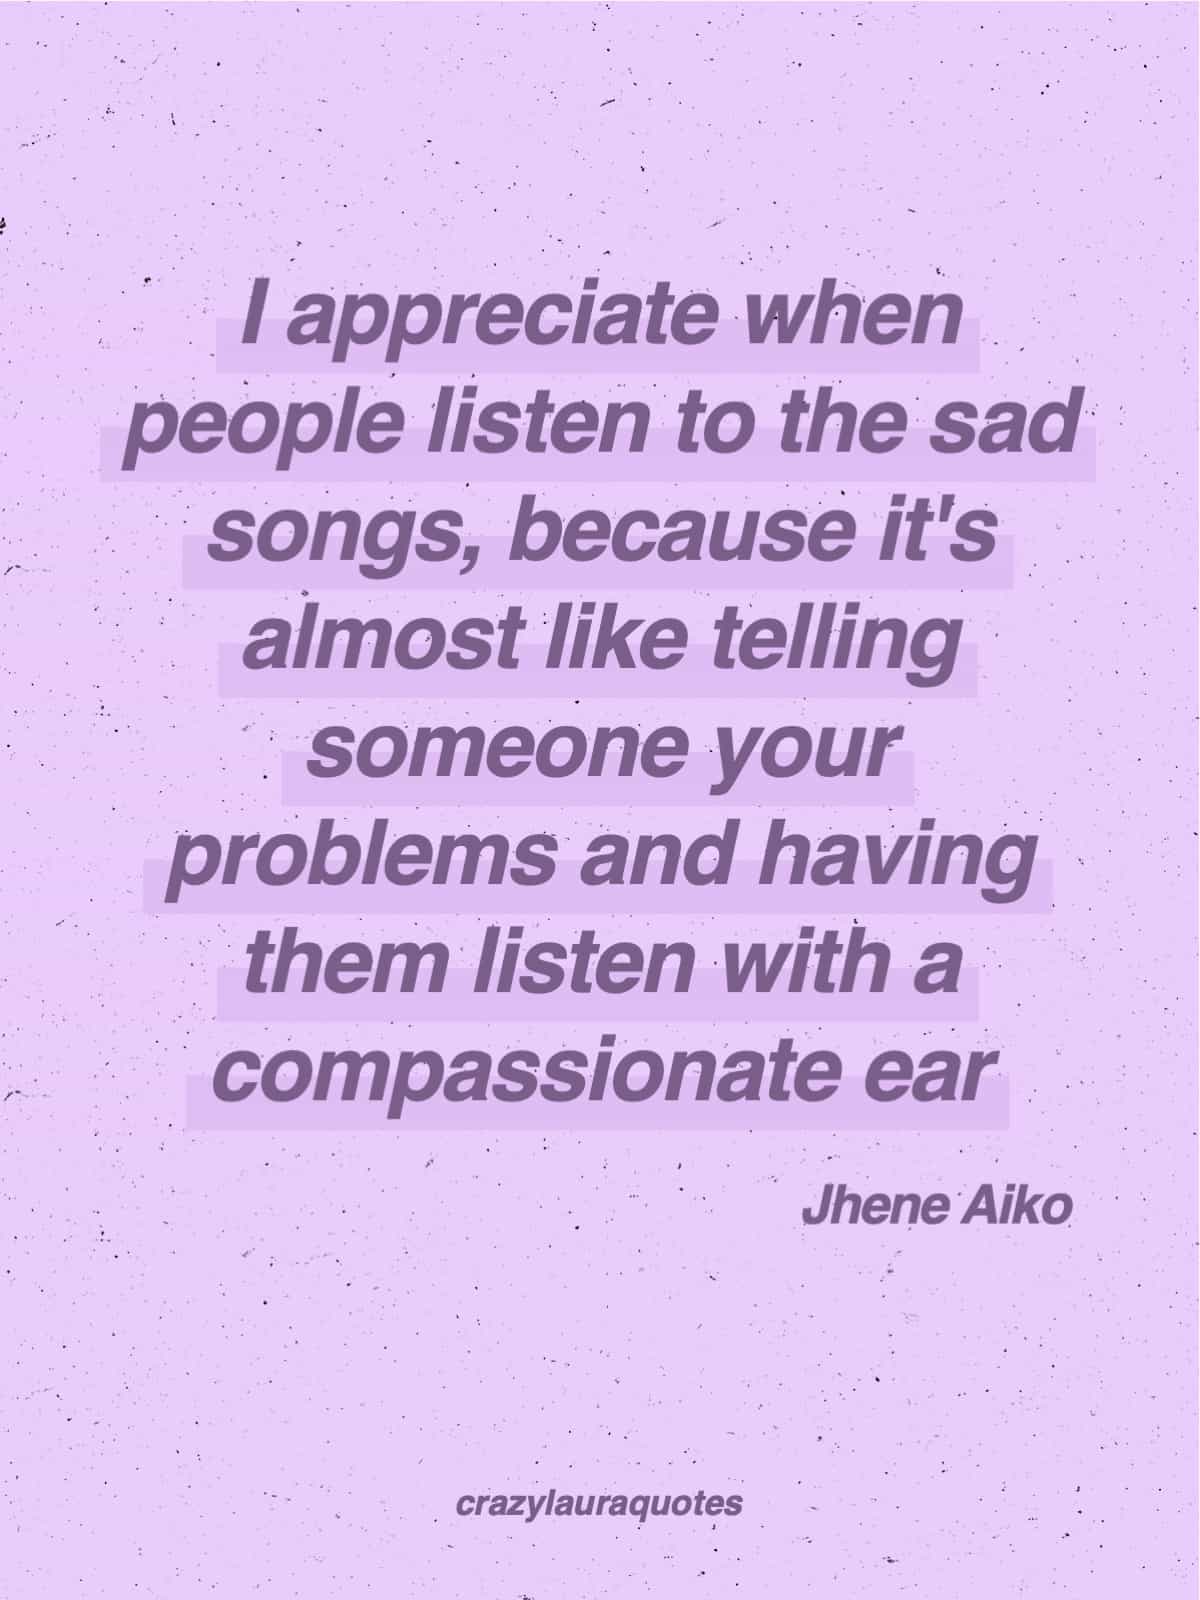 jhene aiko quote about compassion